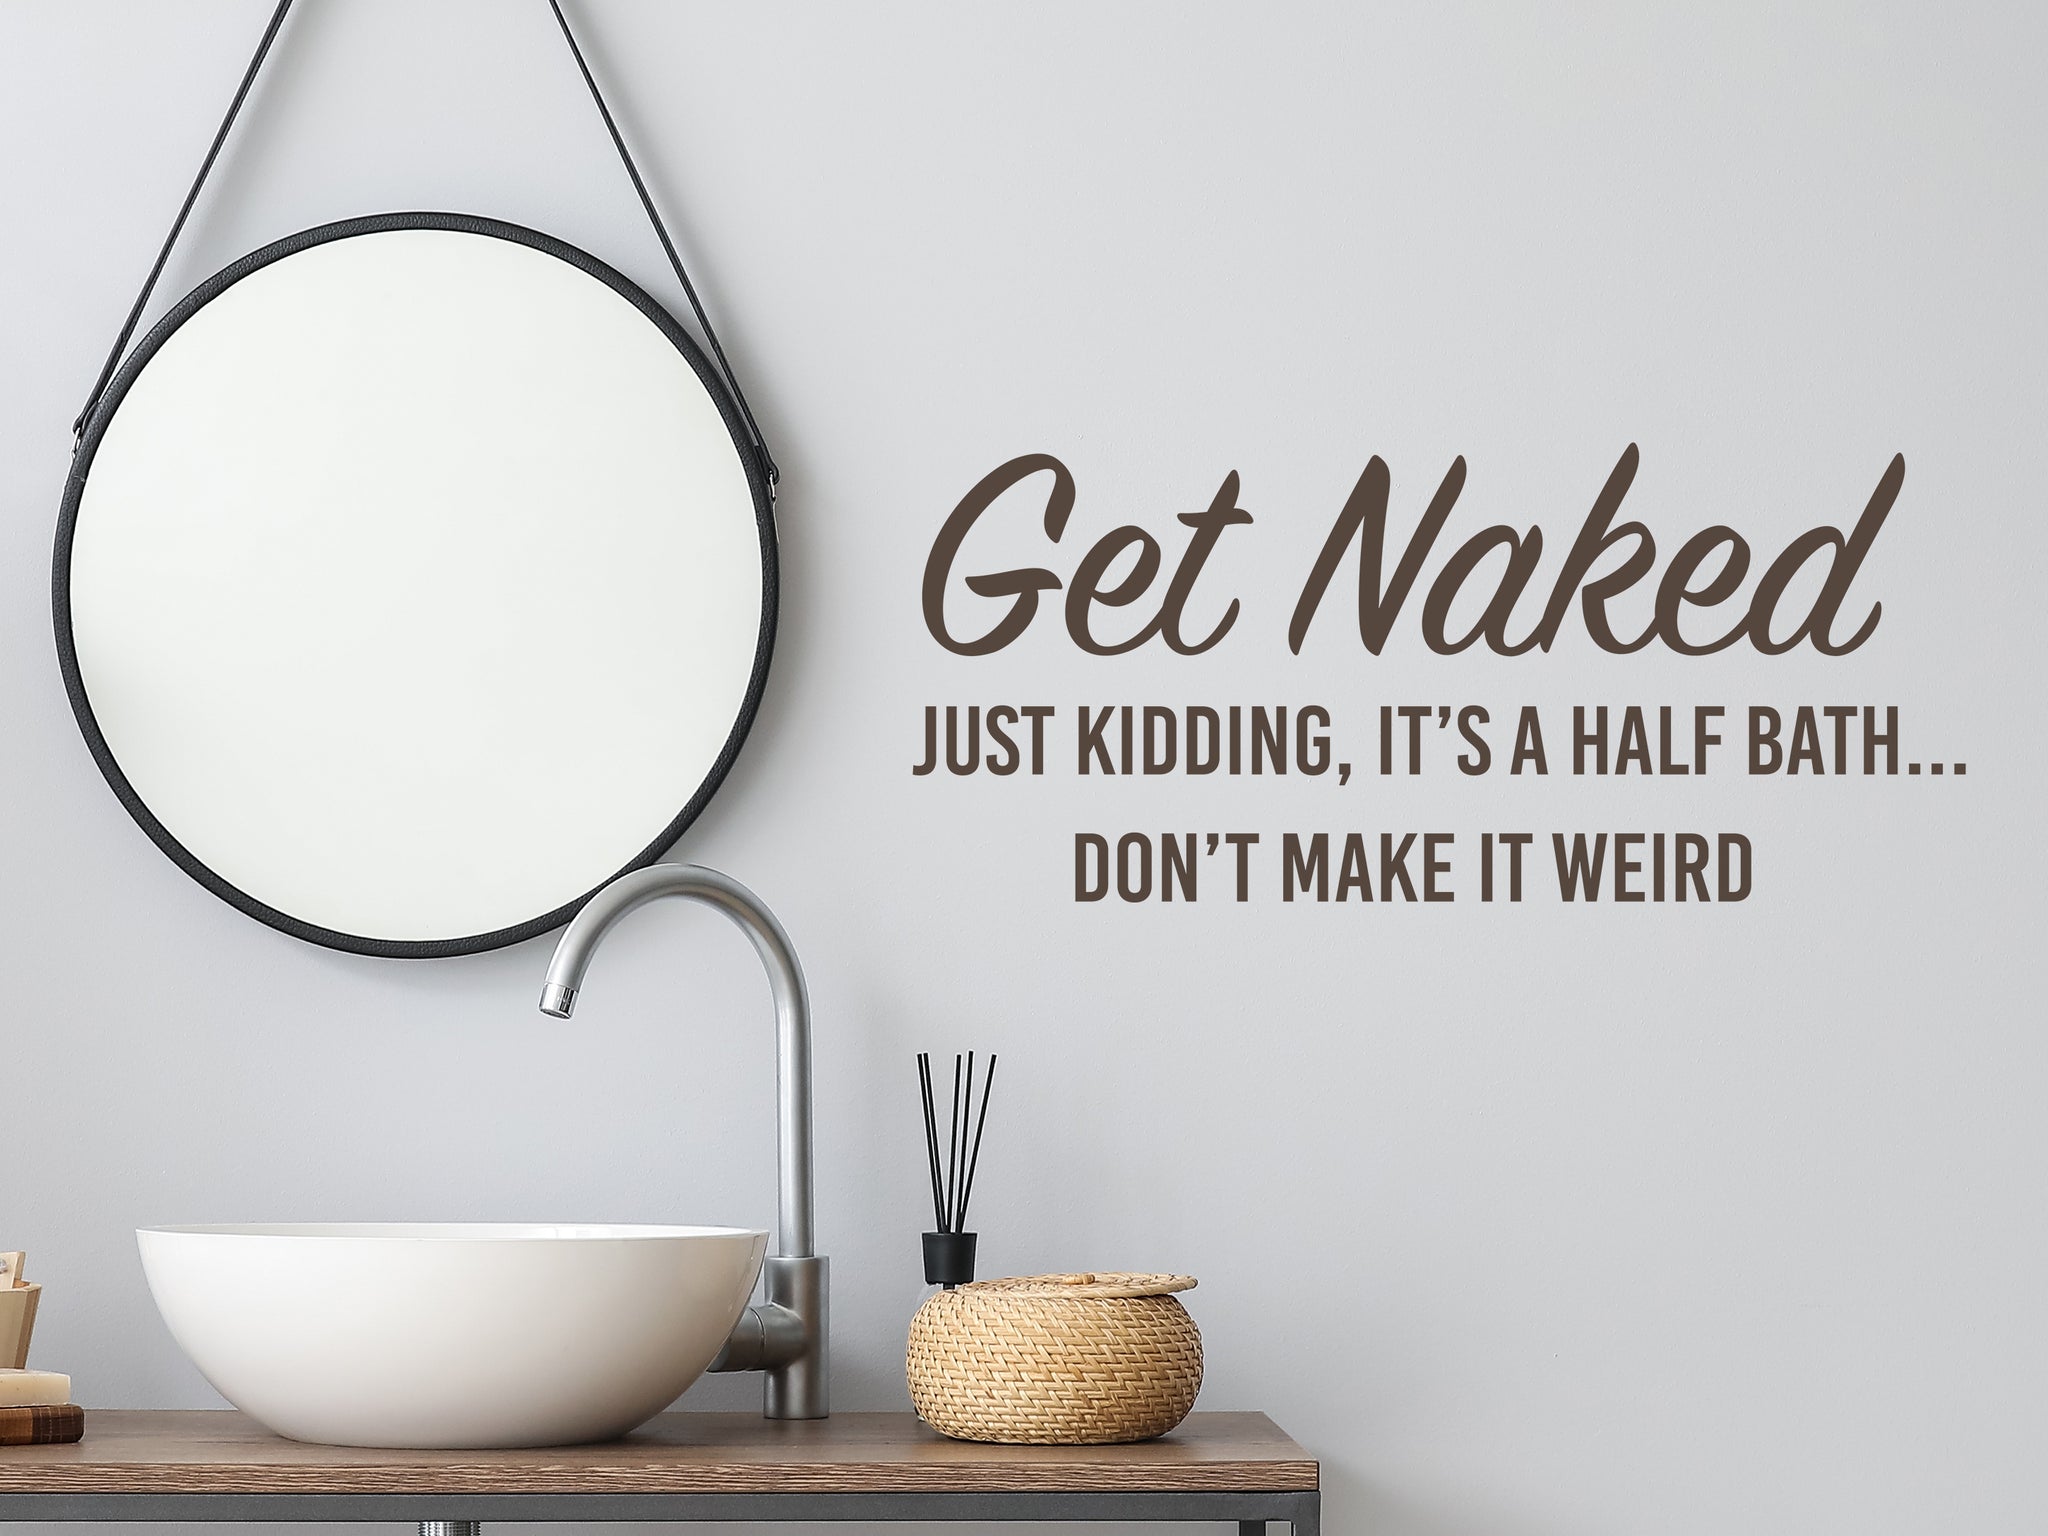 Get Naked Wall Decals Funny Bathroom Wall Sticker Vinyl Decal Bathroom Background Decor Wall Art Toilet Sticker Funny Word Sayings Sticker Get Naked